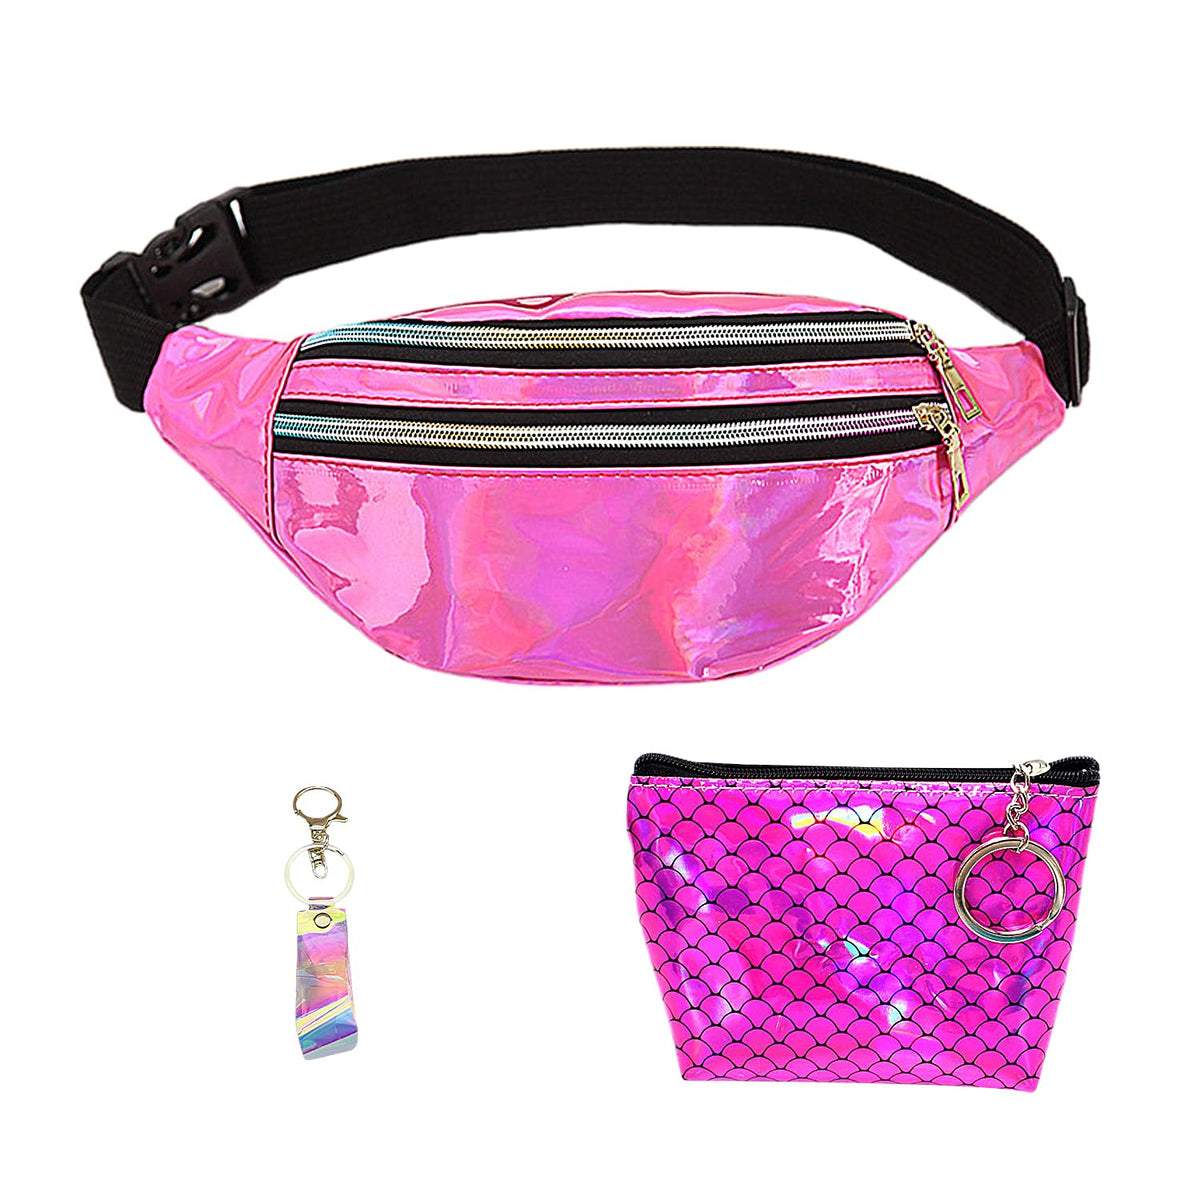 1 Pink Holographic Fanny Pack, 1 Coin Purse, 1 Key Fob, Multifunctional Cross-Body Chest Bag, Fashion Belt Bag, Leather Belt Bag, Sports Belt Bag, for Travel, Outdoor Sports,etc